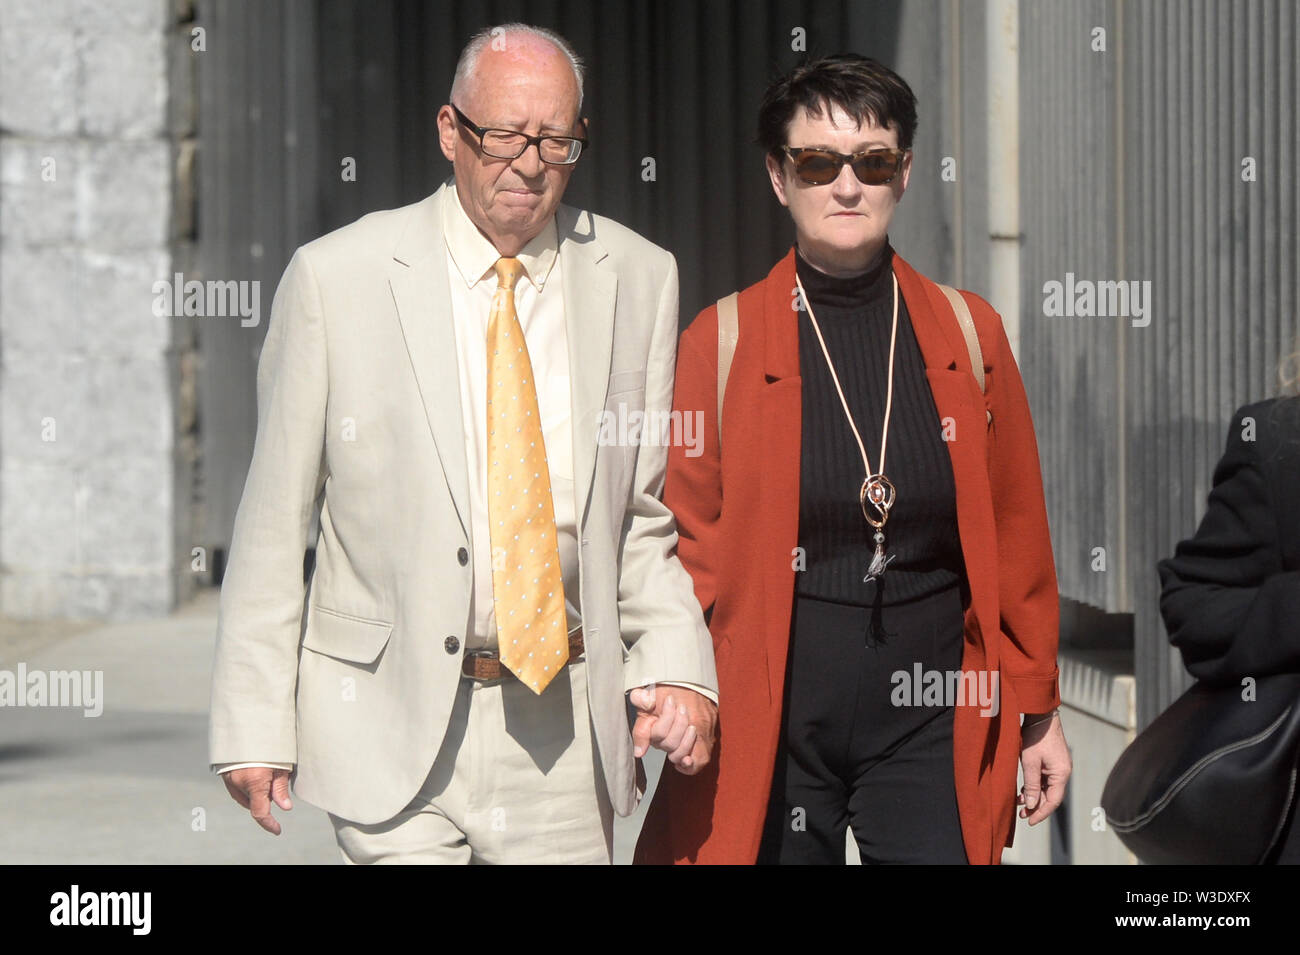 Patrick and Geraldine Kriegel, the parents of murdered Ana Kriegel, arrive at the Criminal Courts of Justice in Dublin. Two juvenile killers are due to be sentenced today after they were convicted of the murder of 14-year-old Kriegel on June 18. Stock Photo